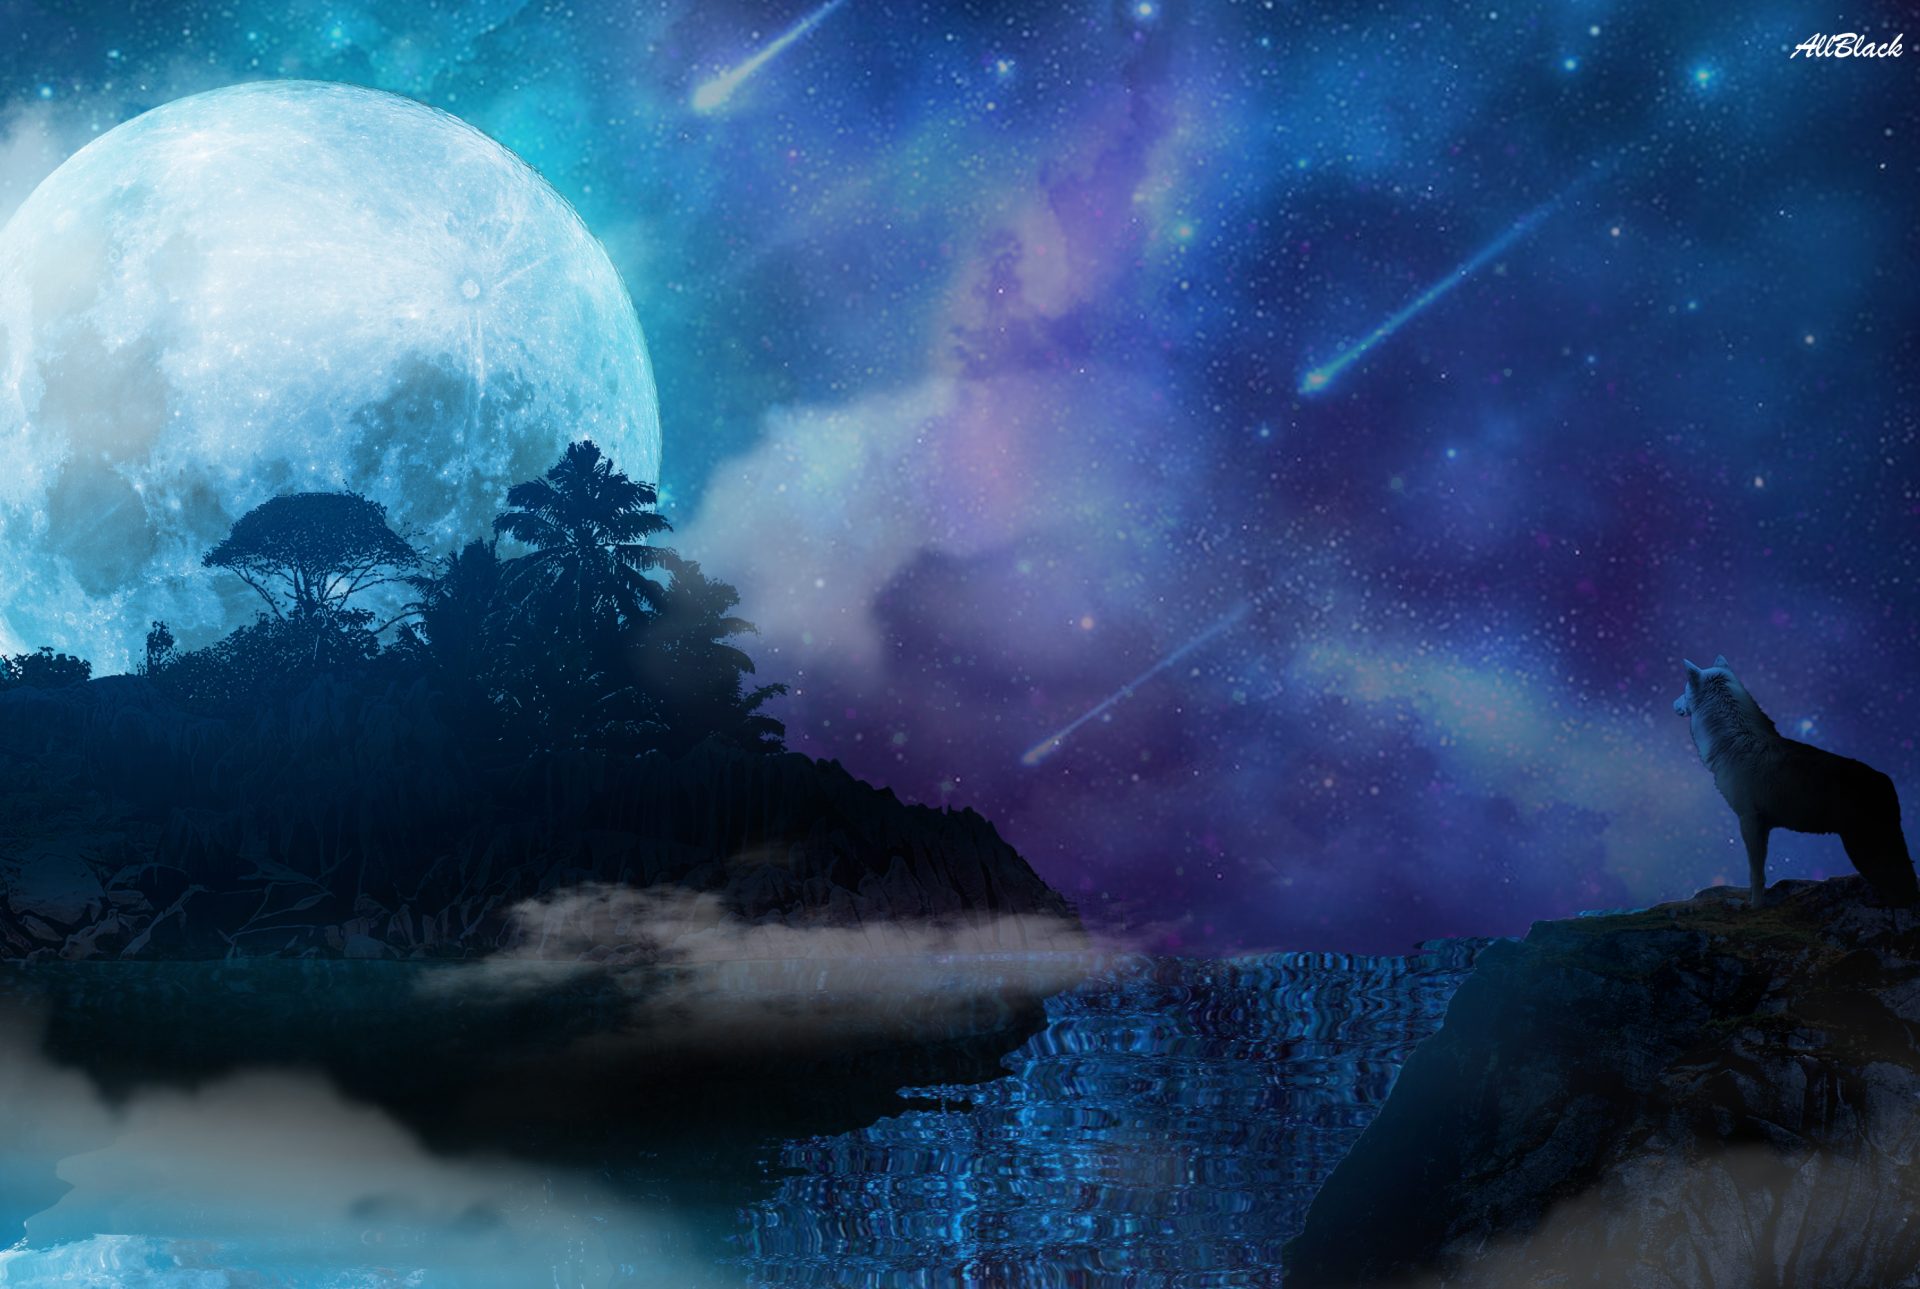 big moon and the night sky in a fantasy atmosphere